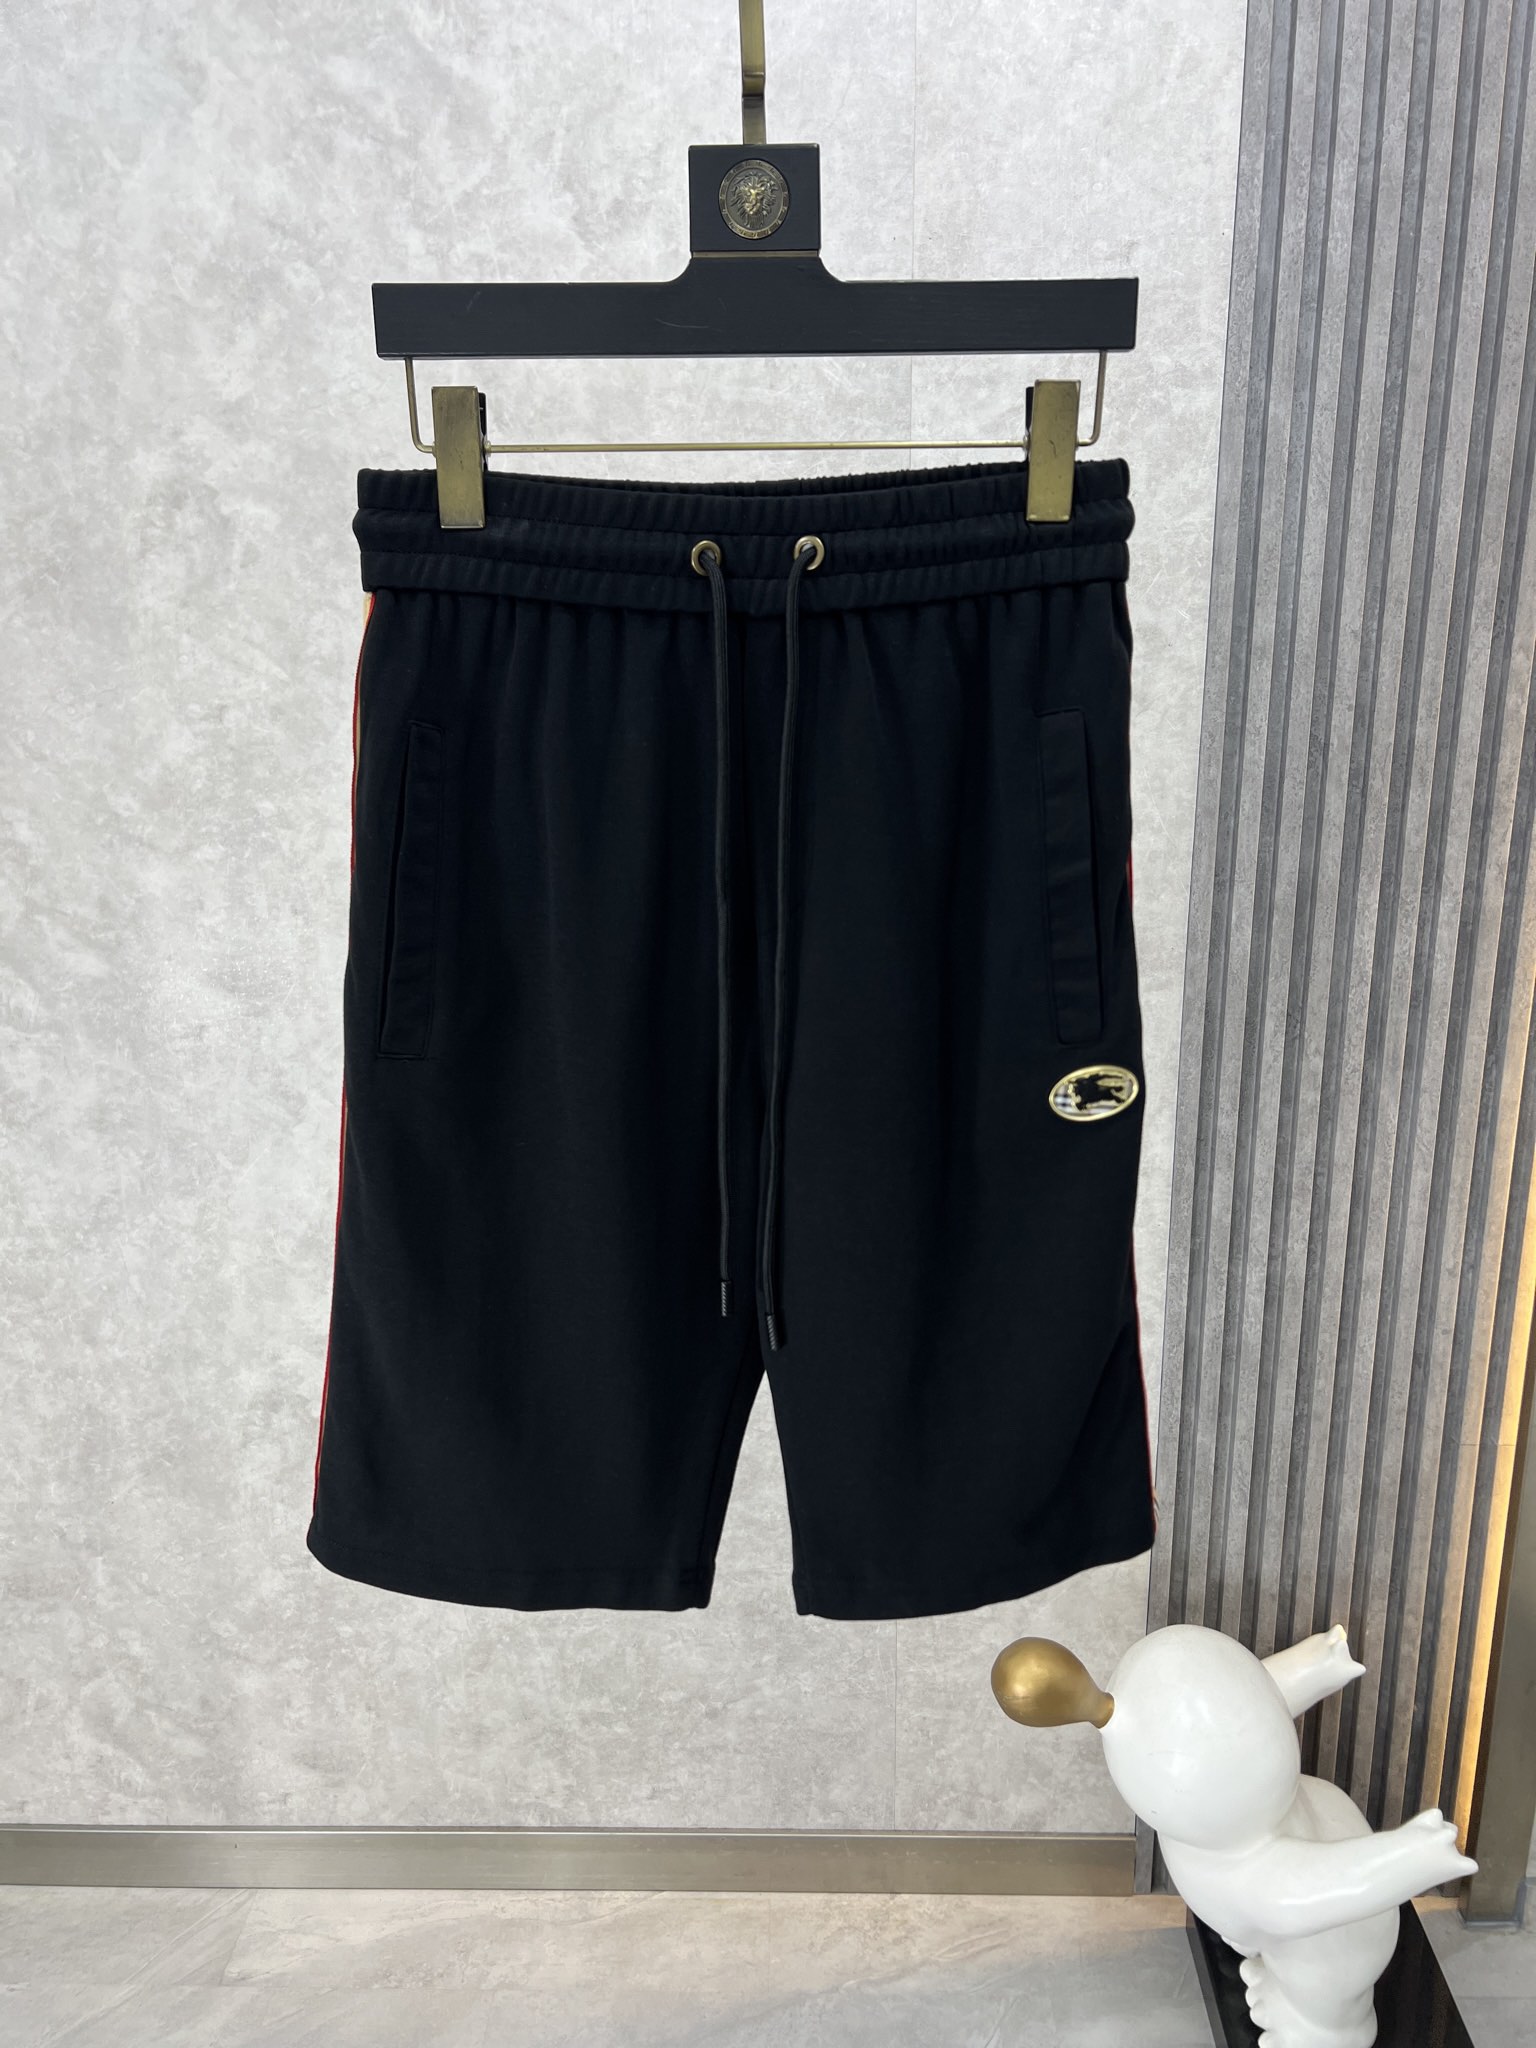 Knockoff Burberry Clothing Shorts Men Summer Collection Fashion Casual